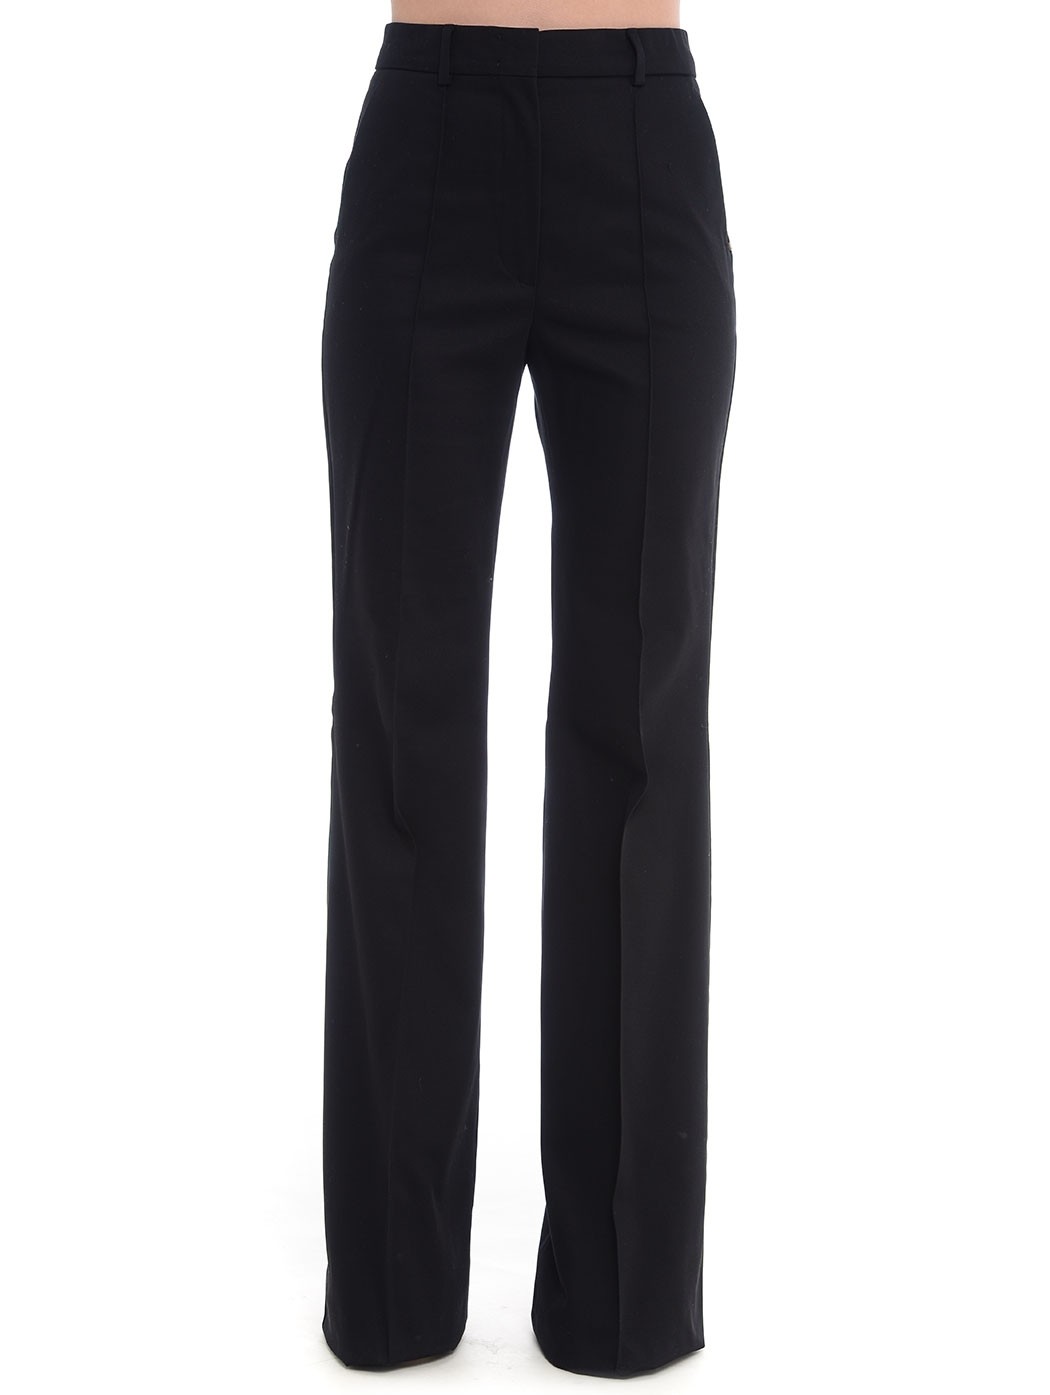  WOMAN TROUSERS,PALAZZO TROUSERS,SKINNY TROUSERS,MARNI TROUSERS,FORTE FORTE TROUSERS,8PM TROUSERS,MSGM TROUSERS,CROP PANTS  SPORTMAX FORMIA